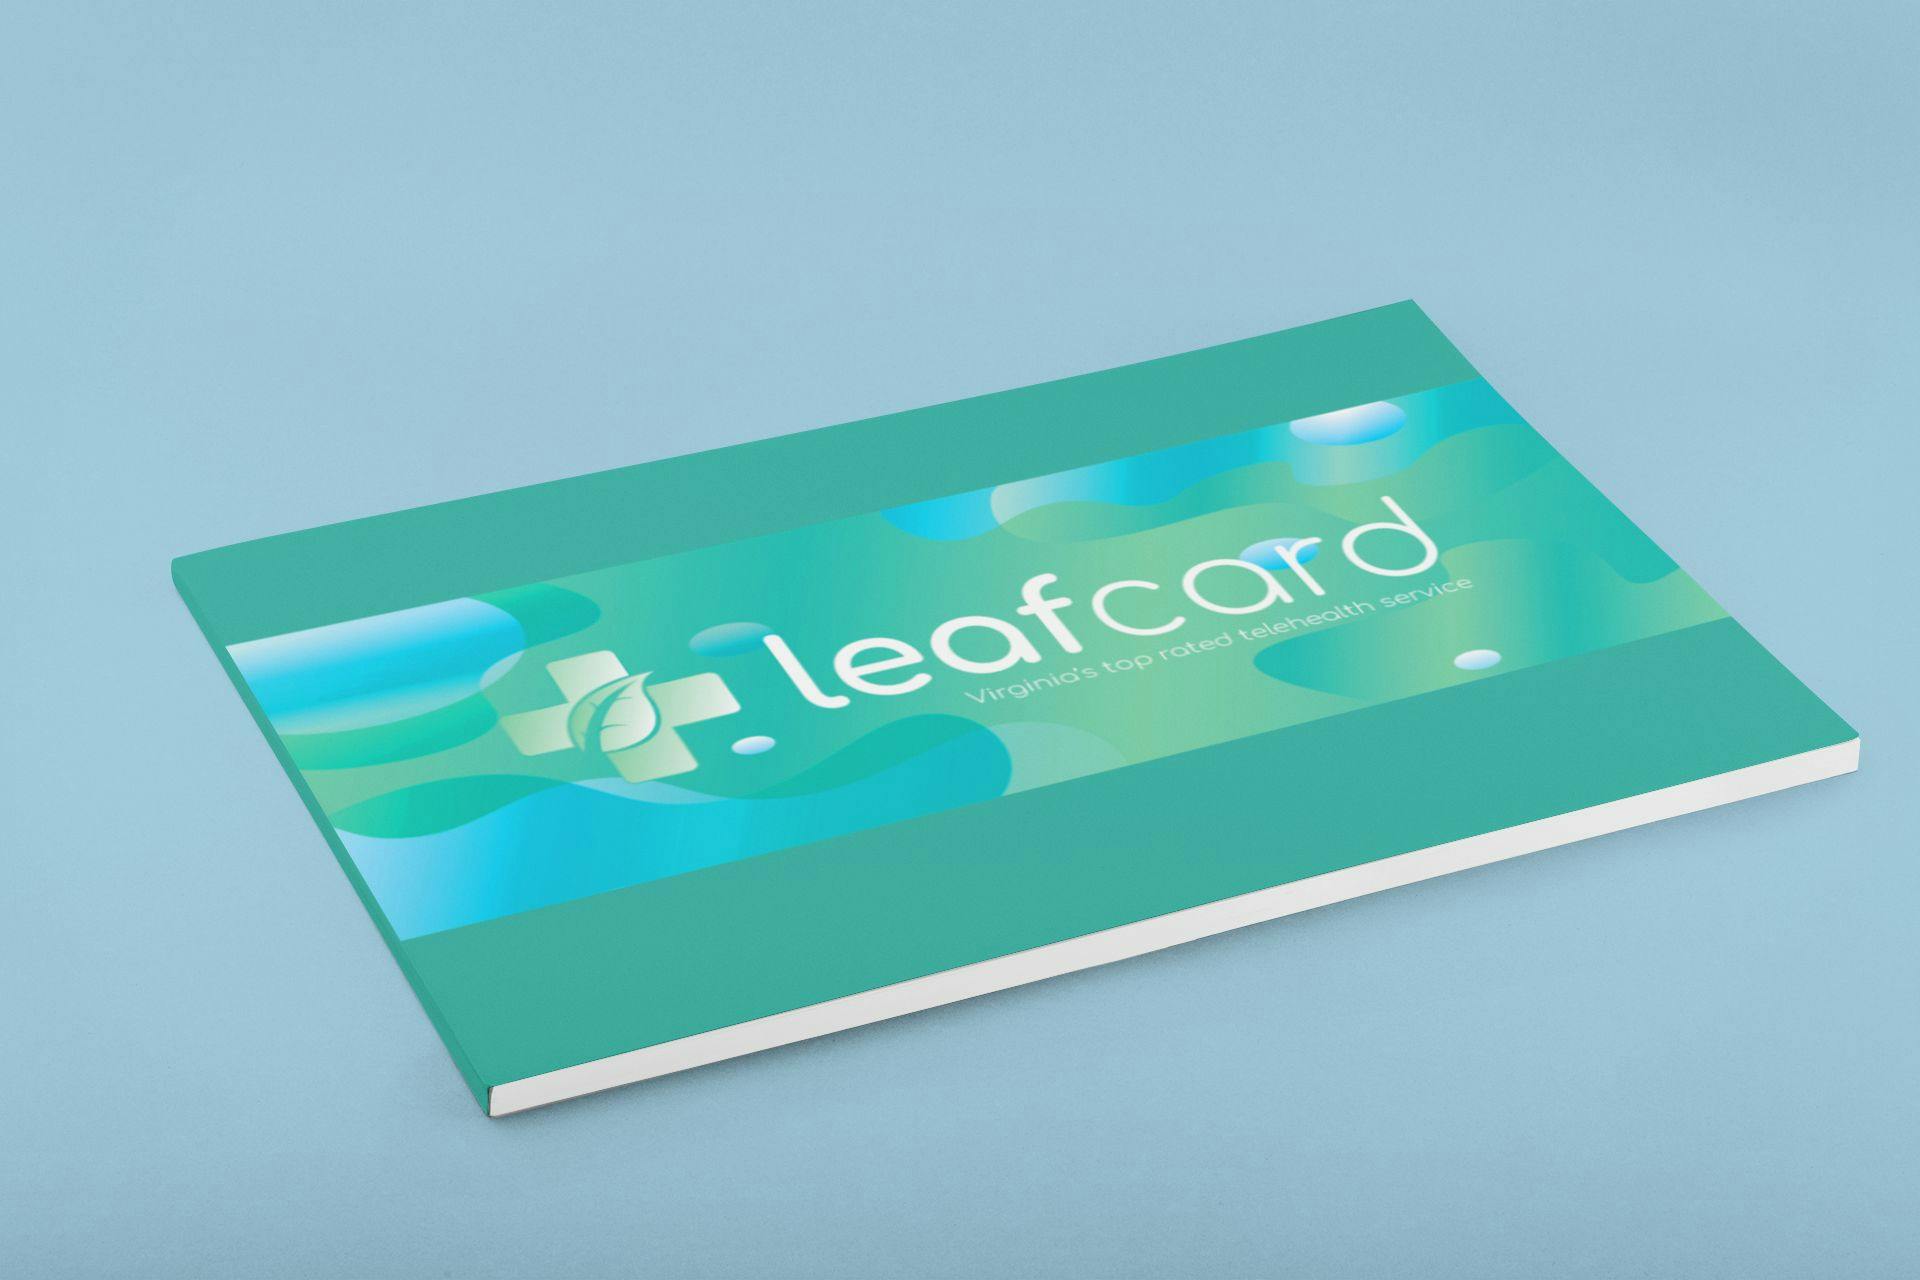 /how-our-leafcard-cannatech-platform-helps-patients-and-provides-educational-materials-082234jq feature image